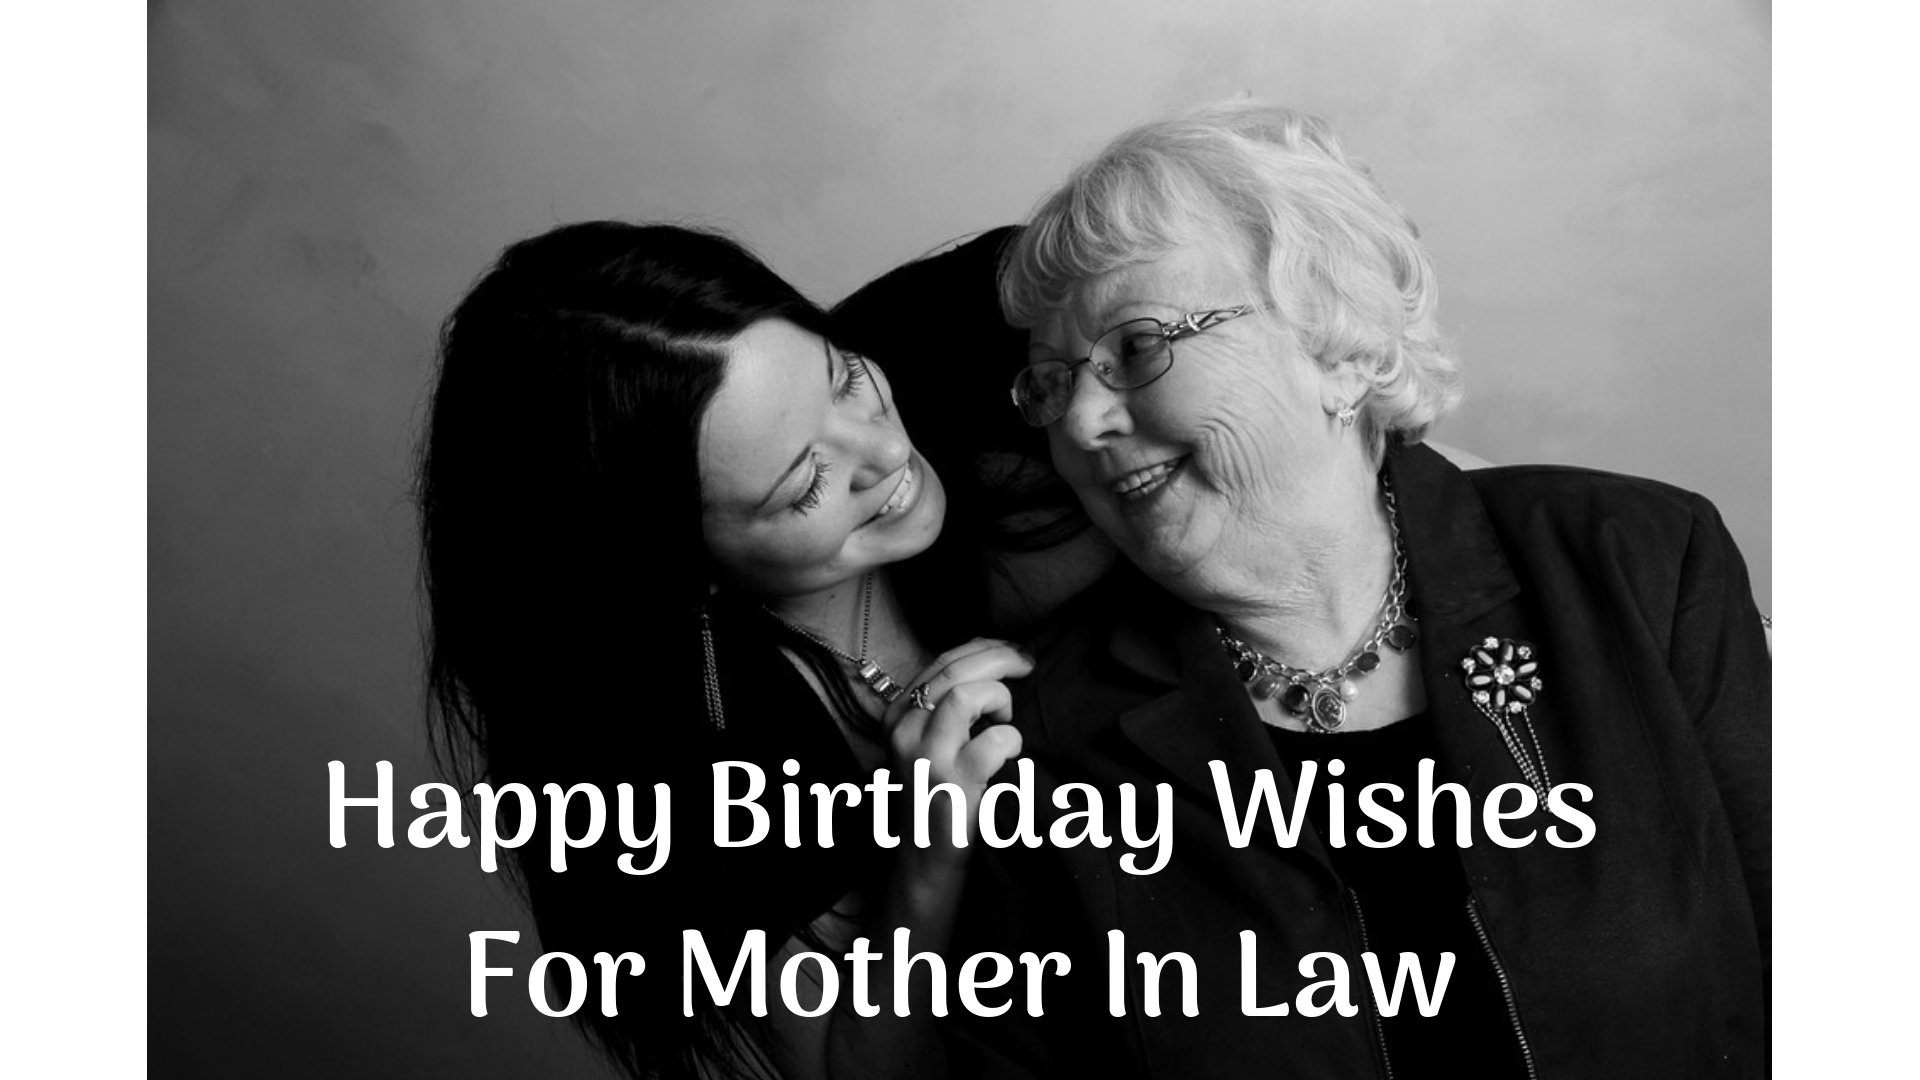 birthday wishes for mother in law